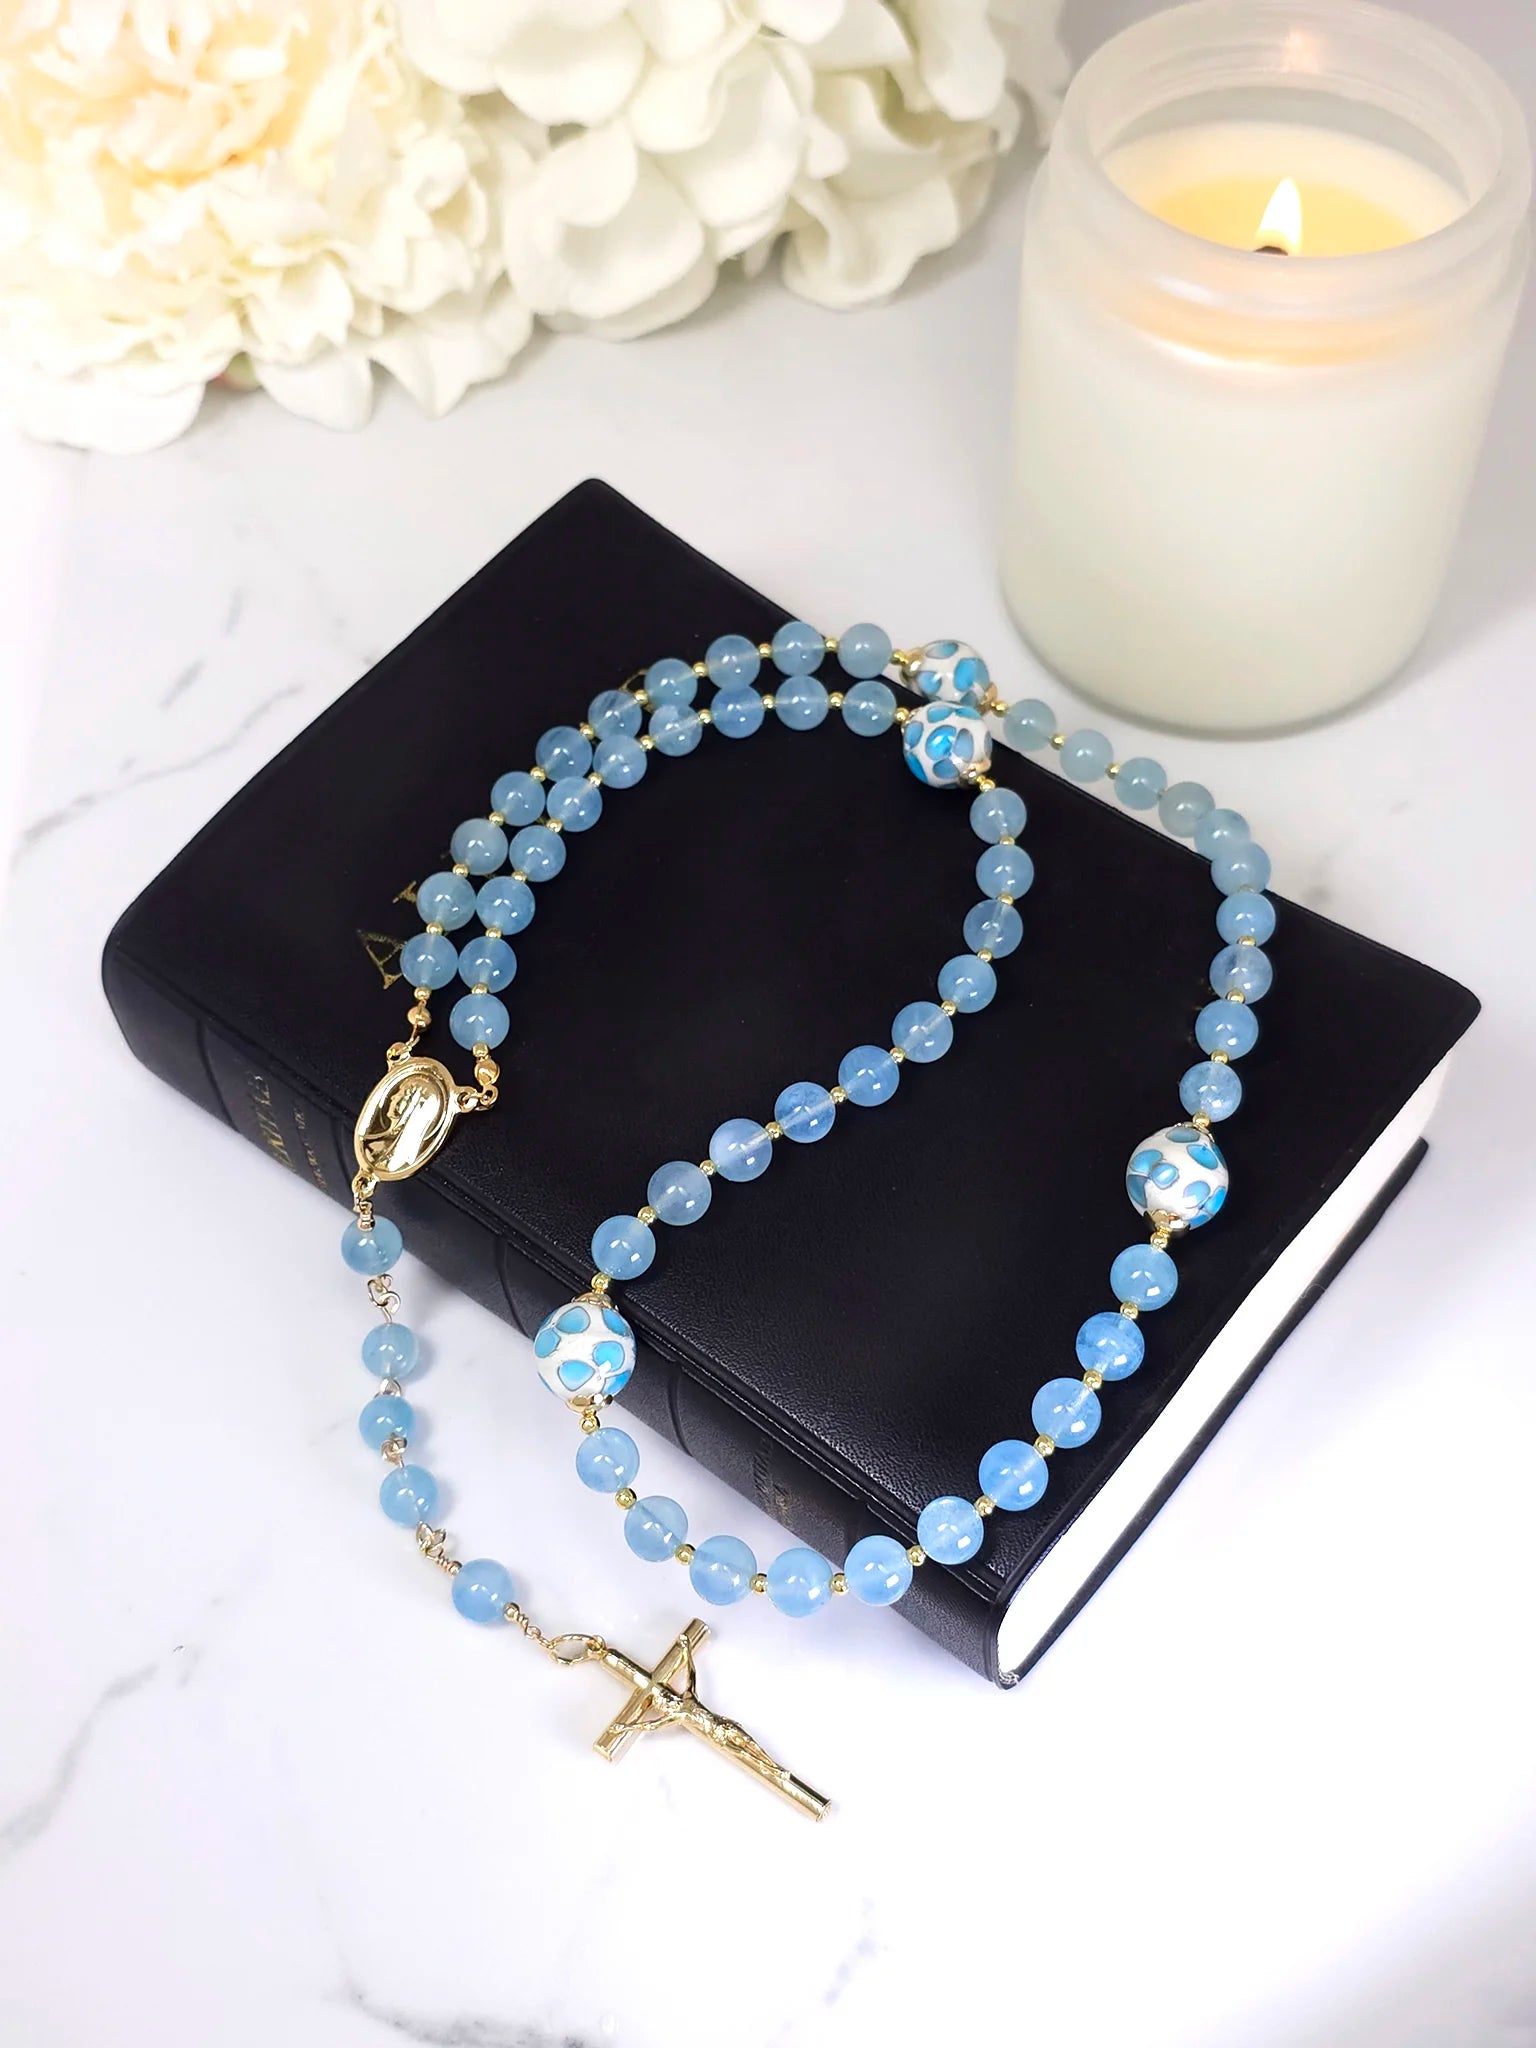 Rosary beads with Blue Aquamarine, elegantly complemented by gold-filled spacers and bead caps, displayed on a white table.